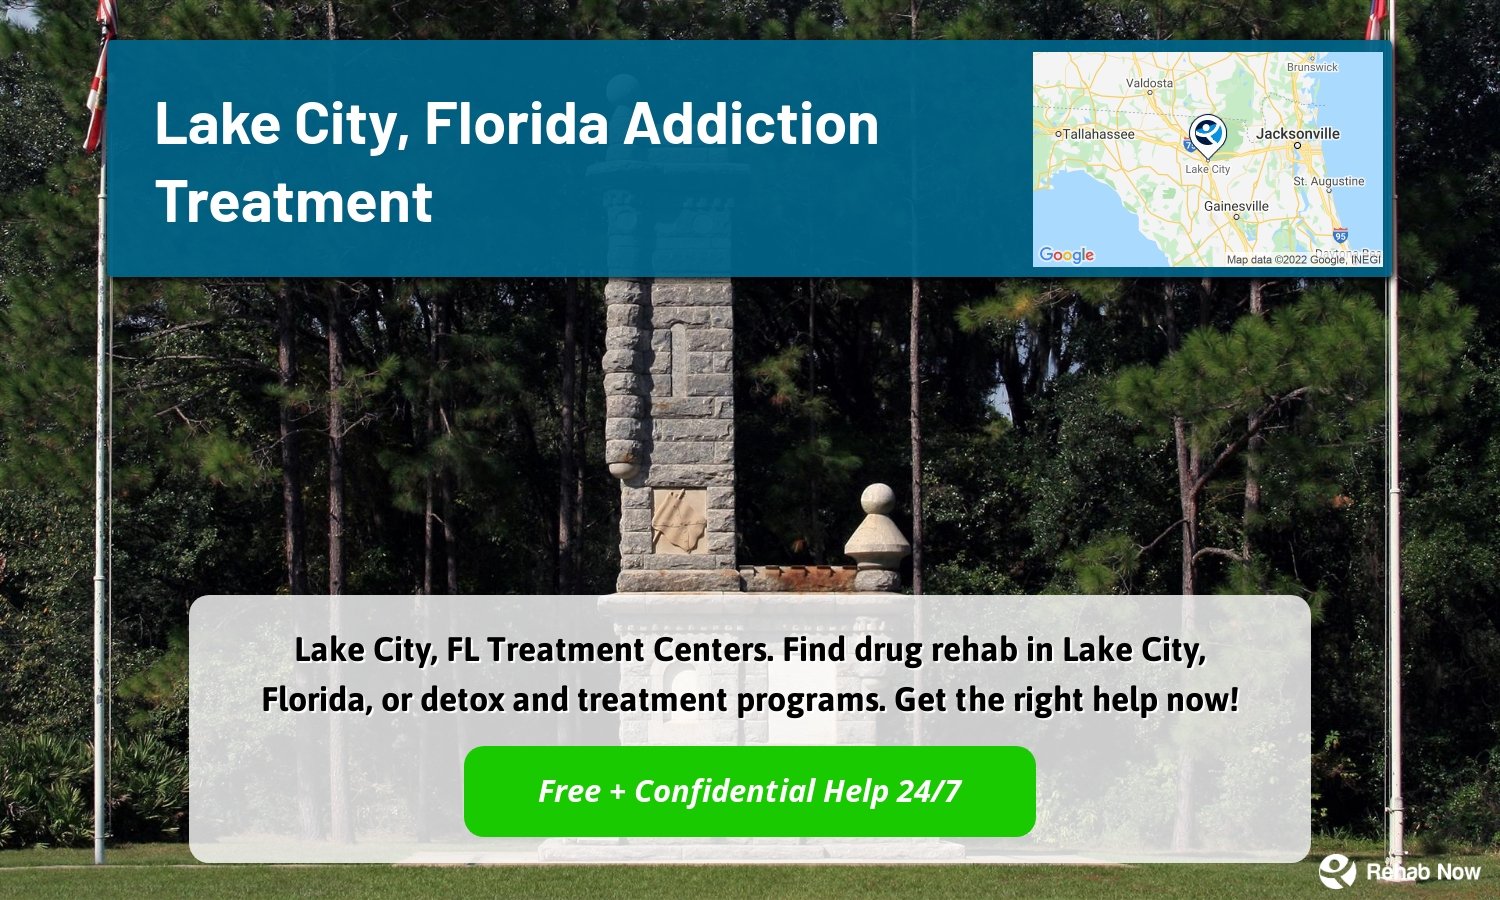 Lake City, FL Treatment Centers. Find drug rehab in Lake City, Florida, or detox and treatment programs. Get the right help now!